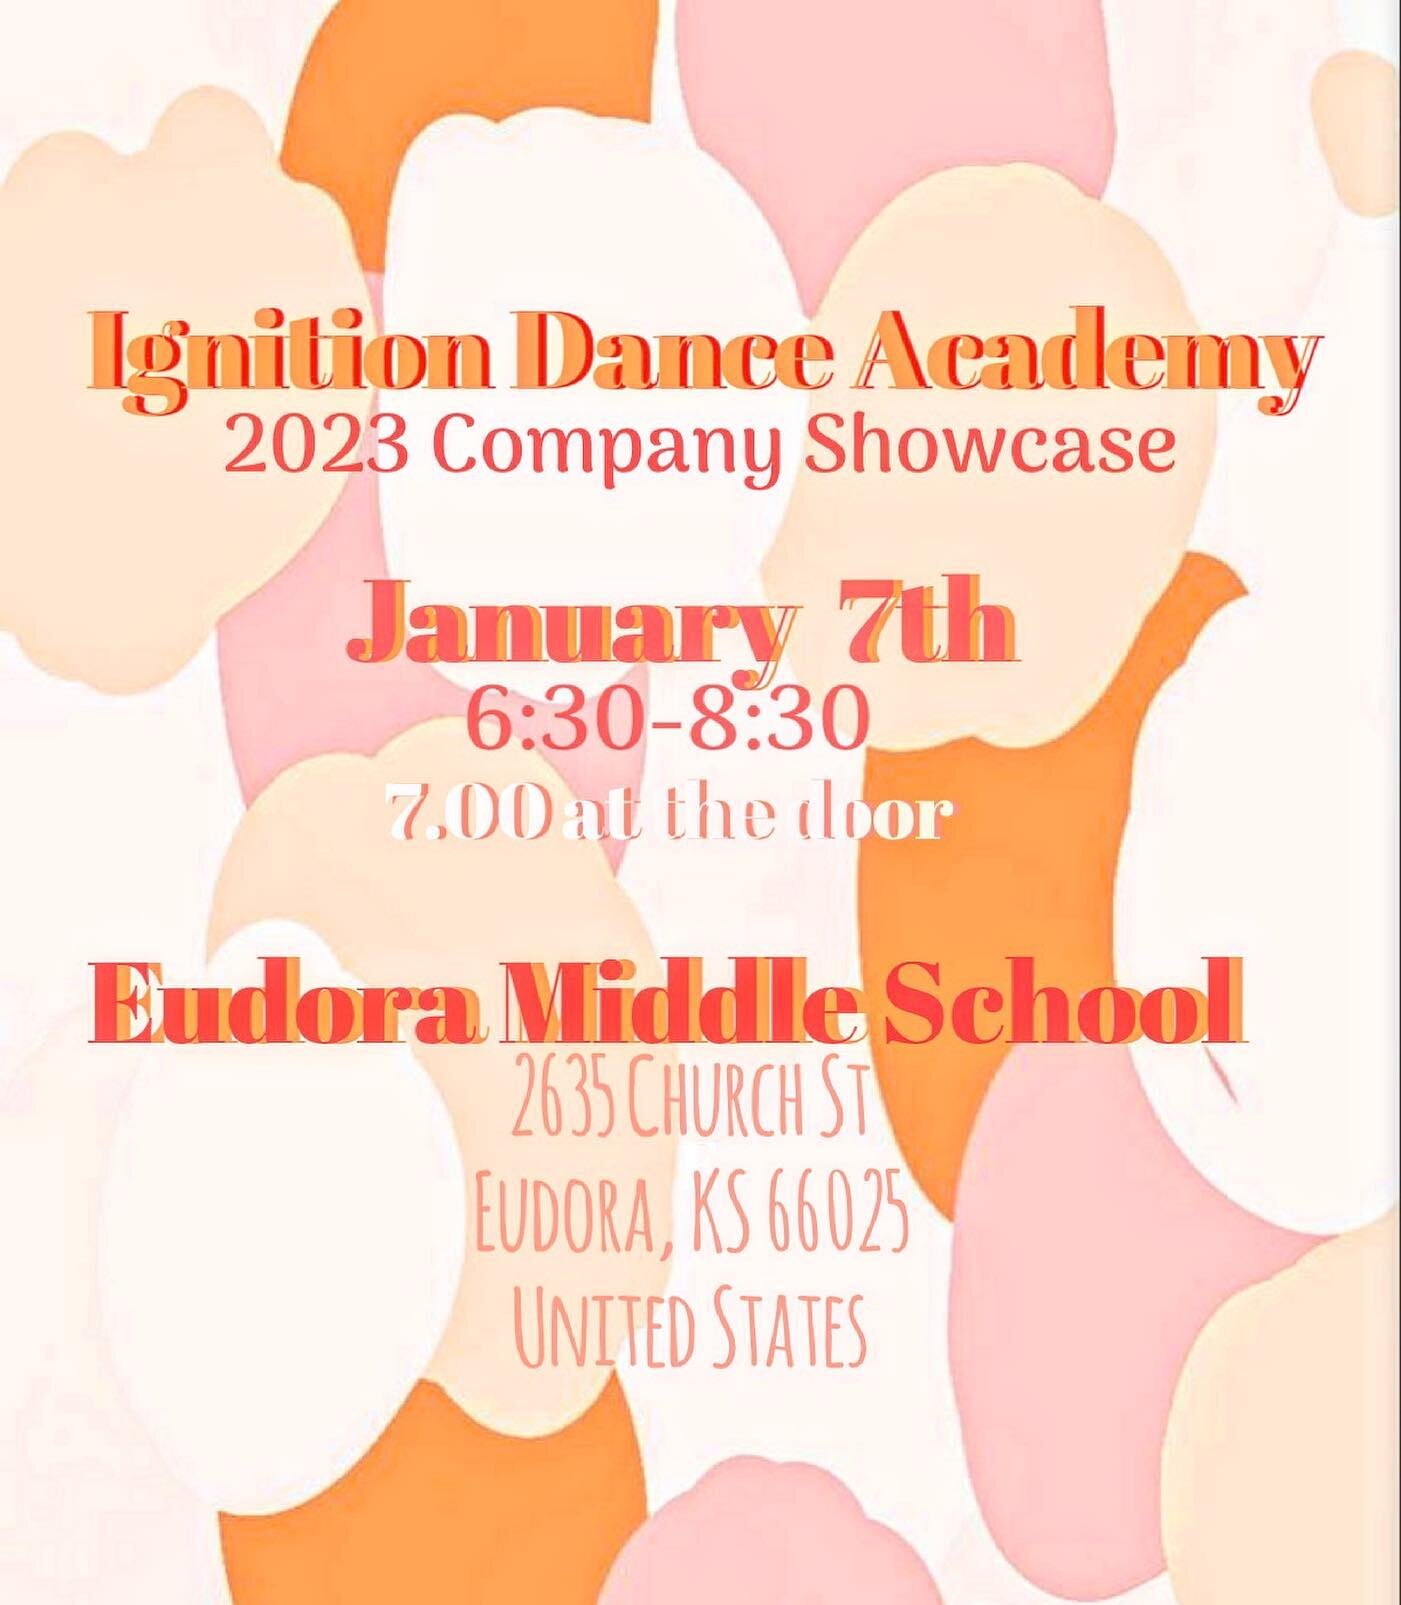 Ignition Dance Academy&rsquo;s 2023 Company Showcase!! We are only one month away! We have been working so hard preparing for this season and you don&rsquo;t want to miss it💛